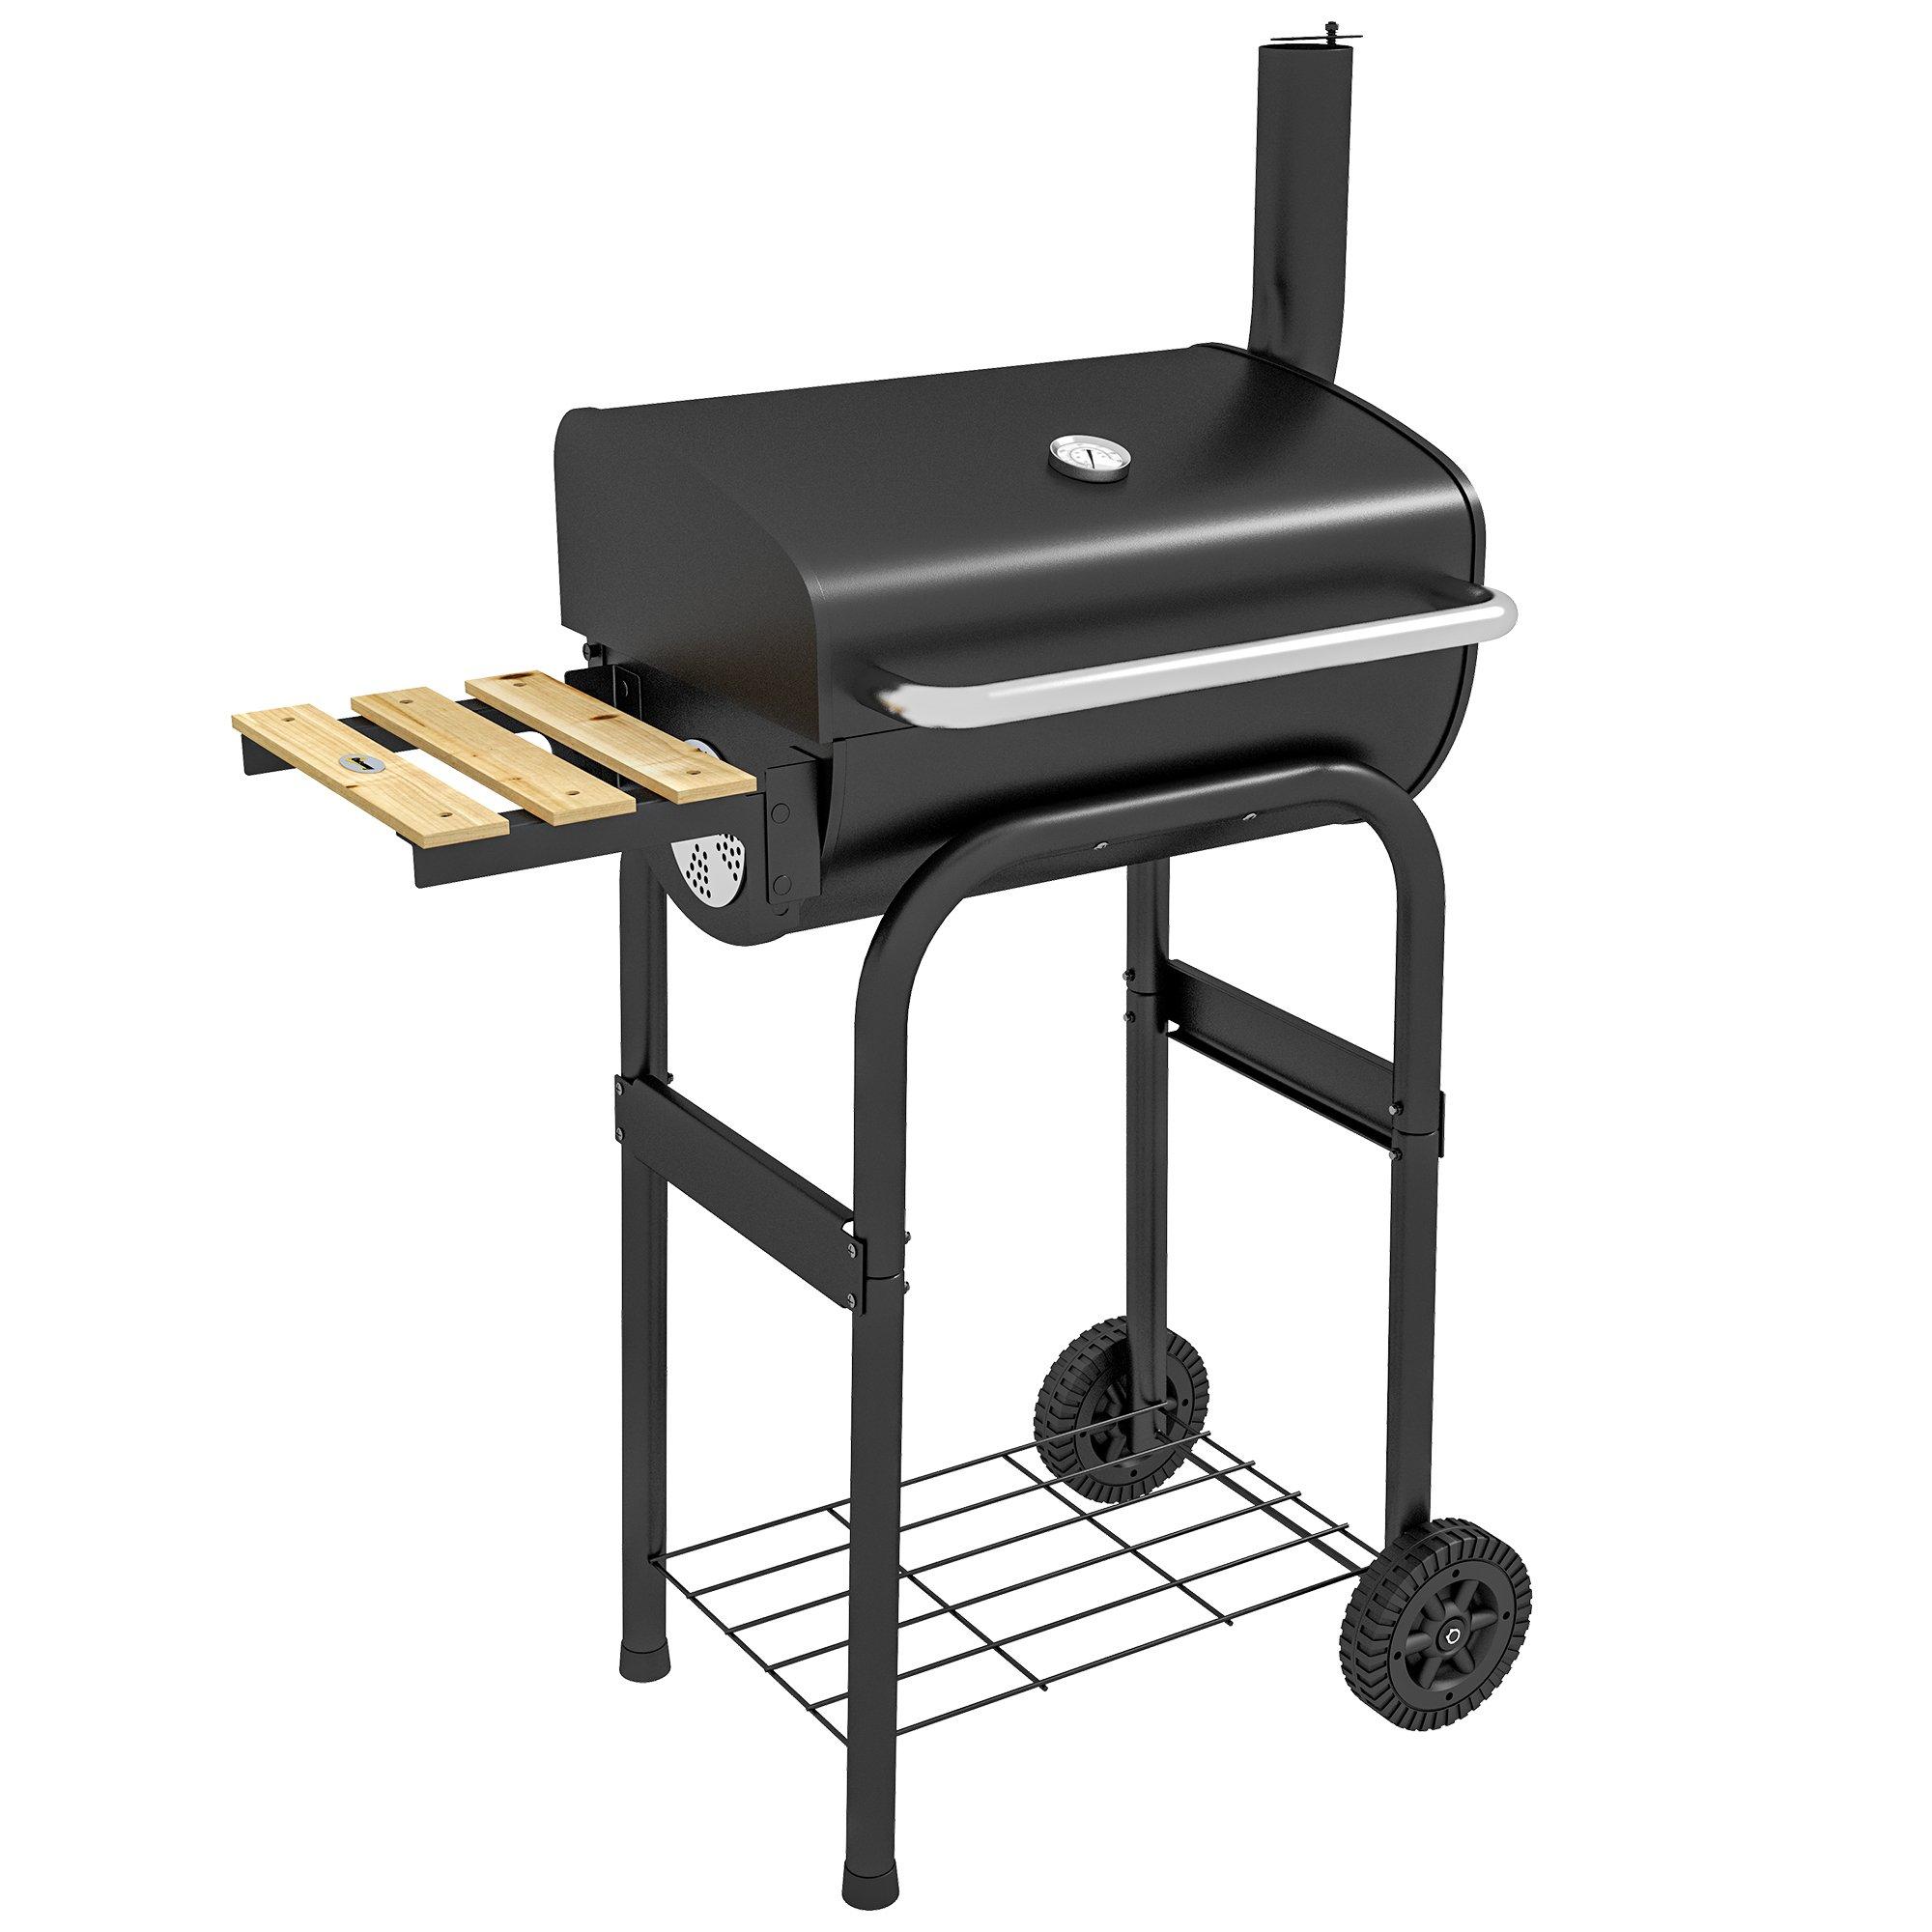 Charcoal Barbecue Grill with Shelves and Wheels, Portable BBQ Trolley Smoker